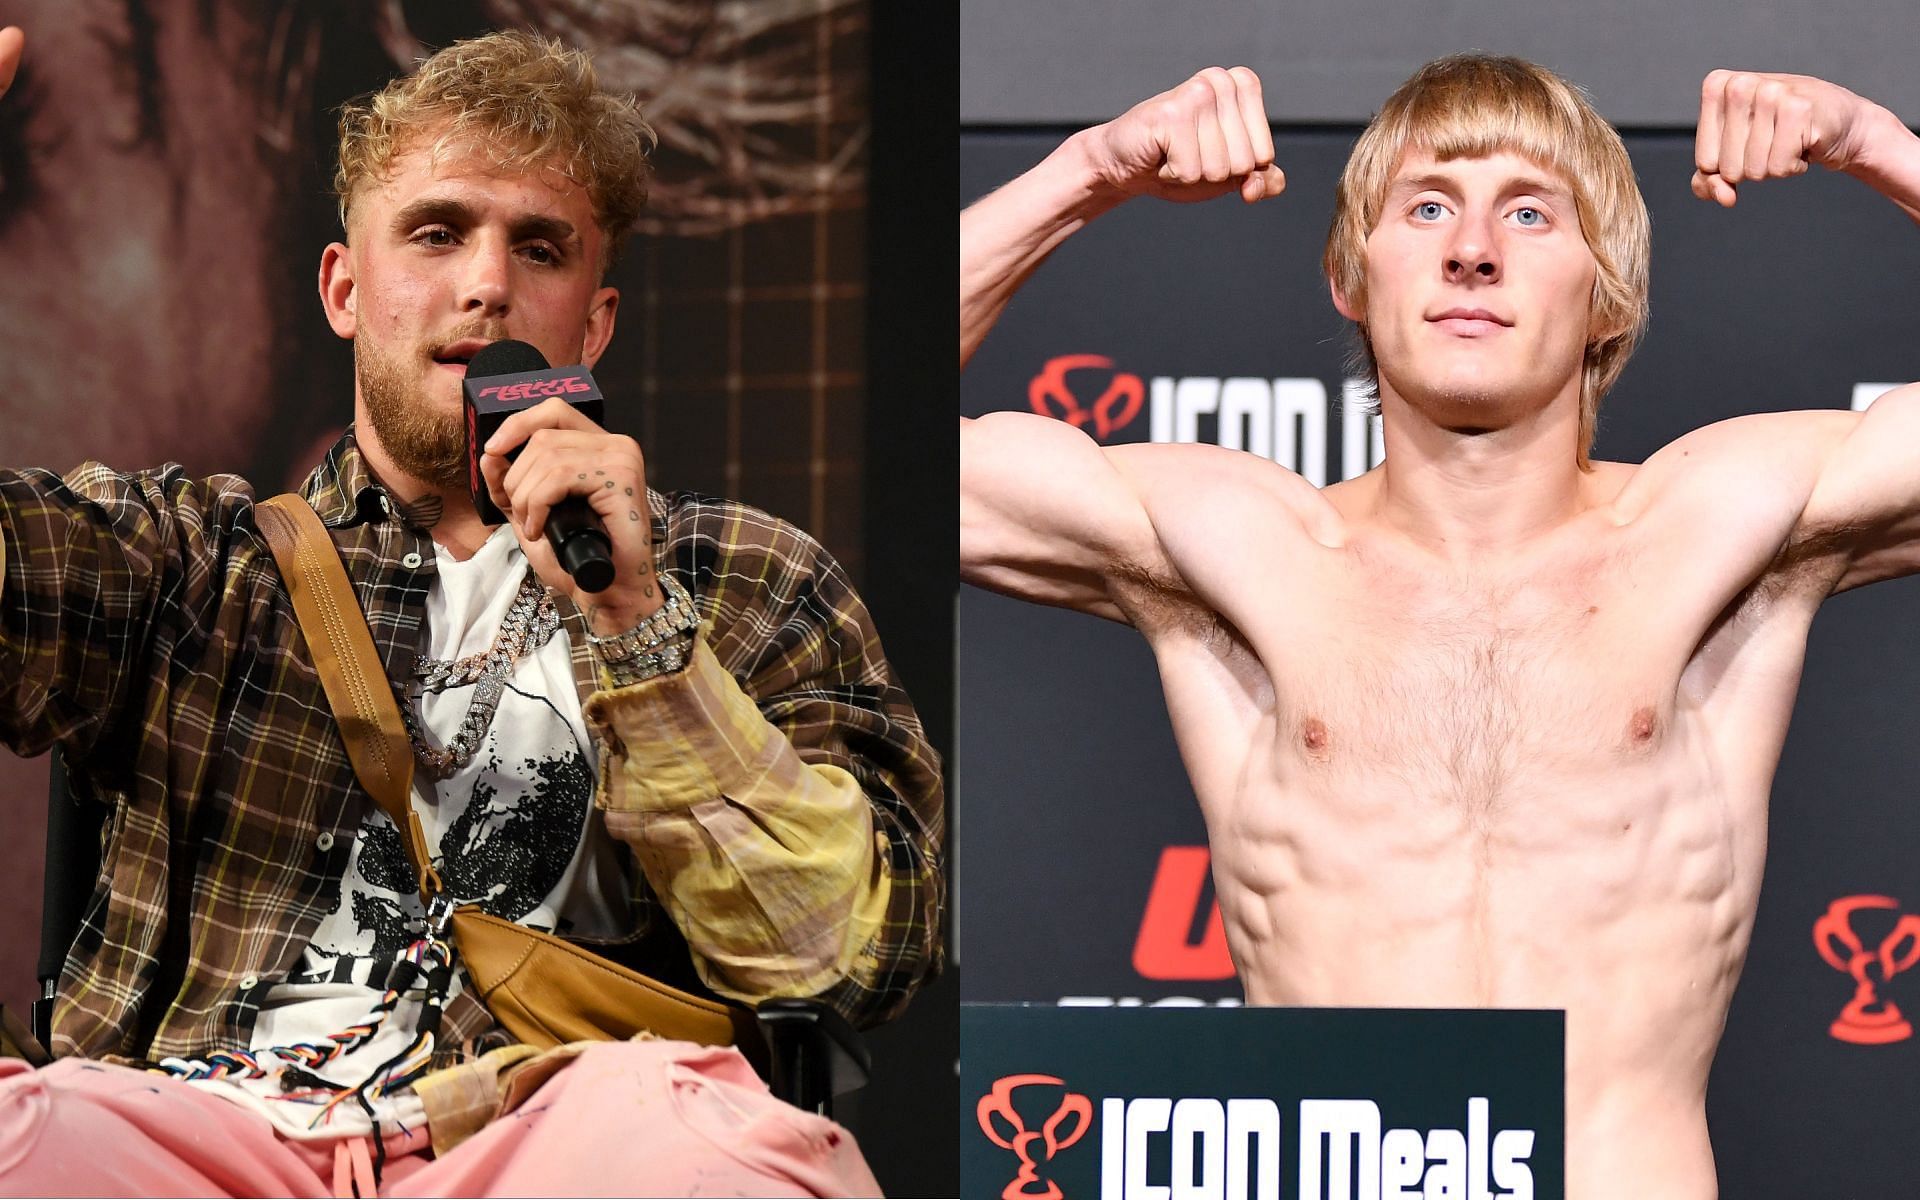 Jake Paul (left) and Paddy Pimblett (right) (Images via Getty)